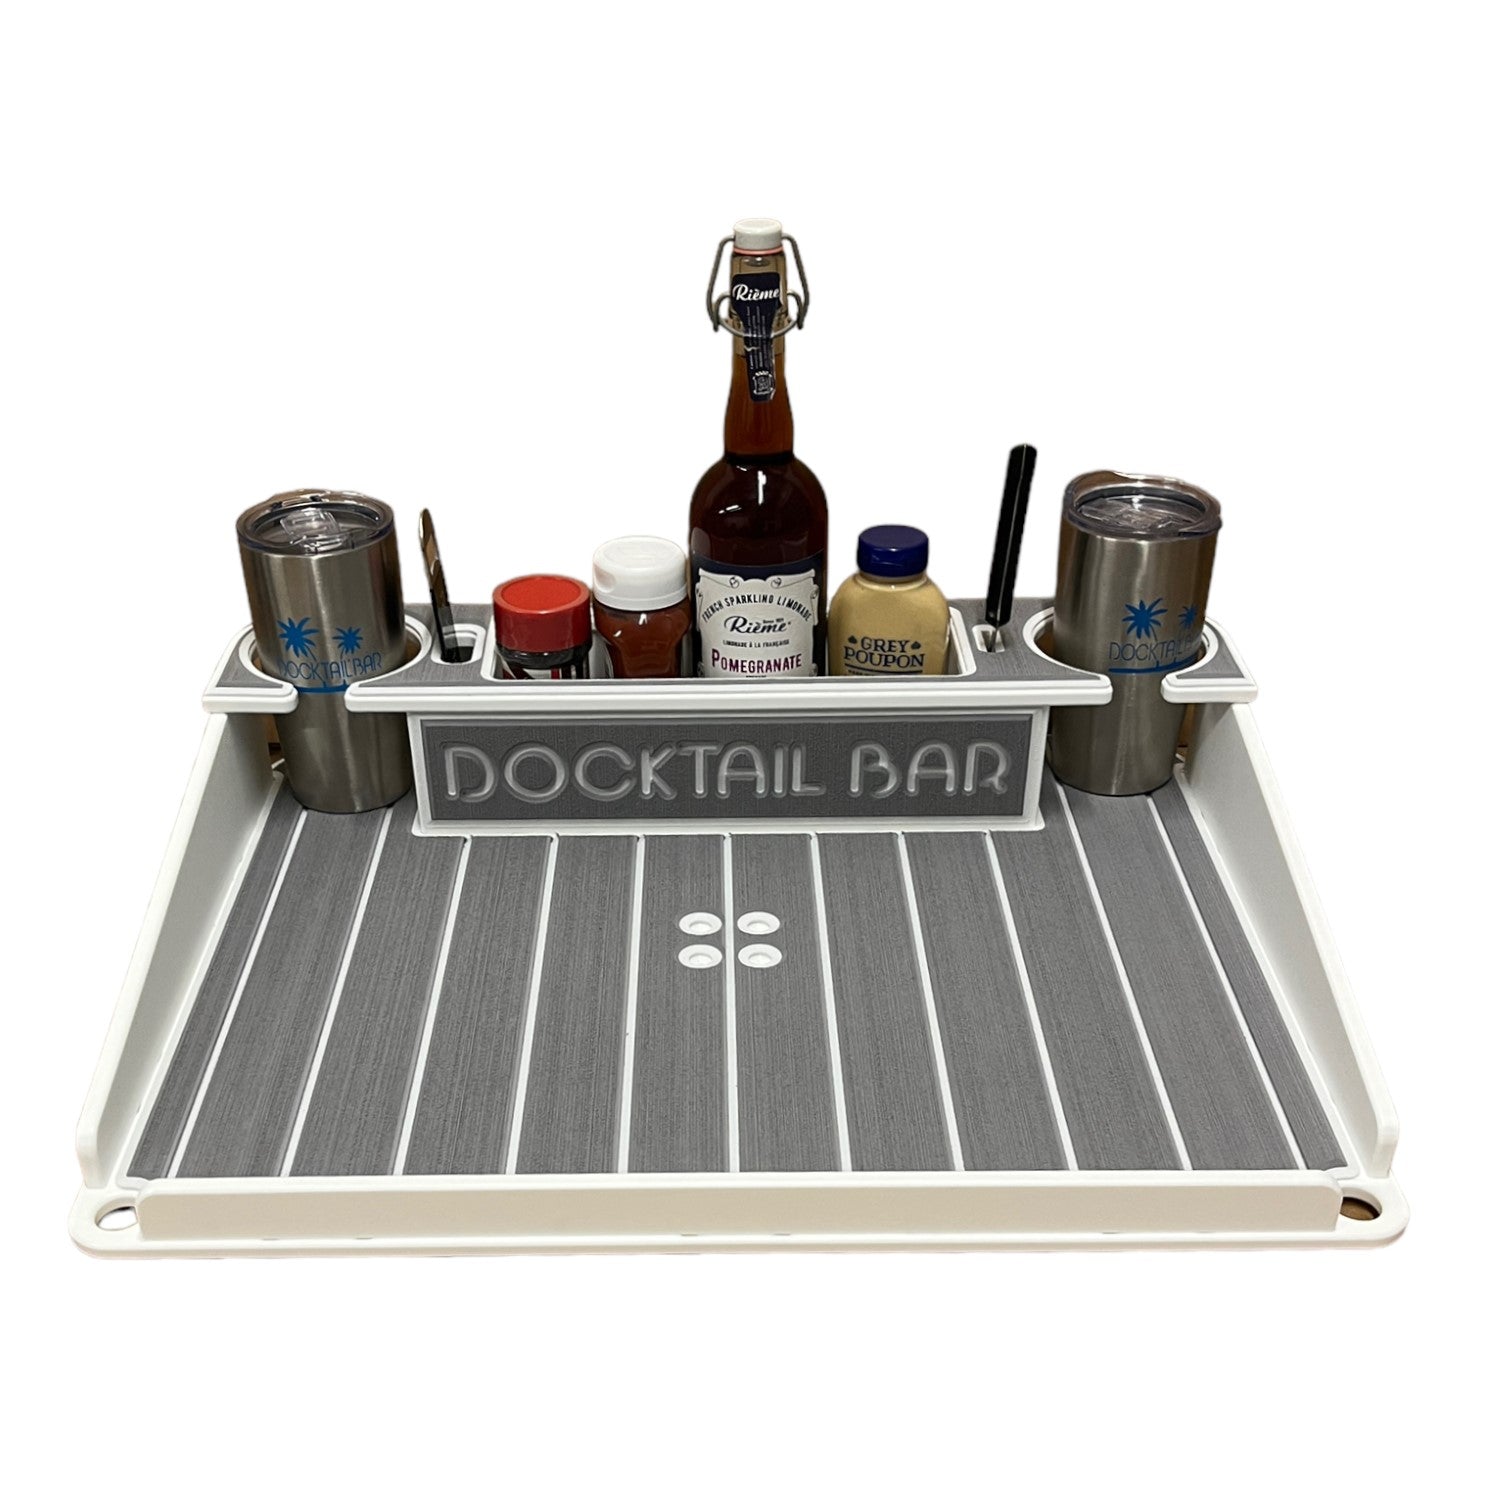 Docktail Bar Utility Boat Table - Includes Rod Holder Mount | Boat Caddy Organizer, Portable Boat Table and Boat Bar, Marine Tables for Boats with